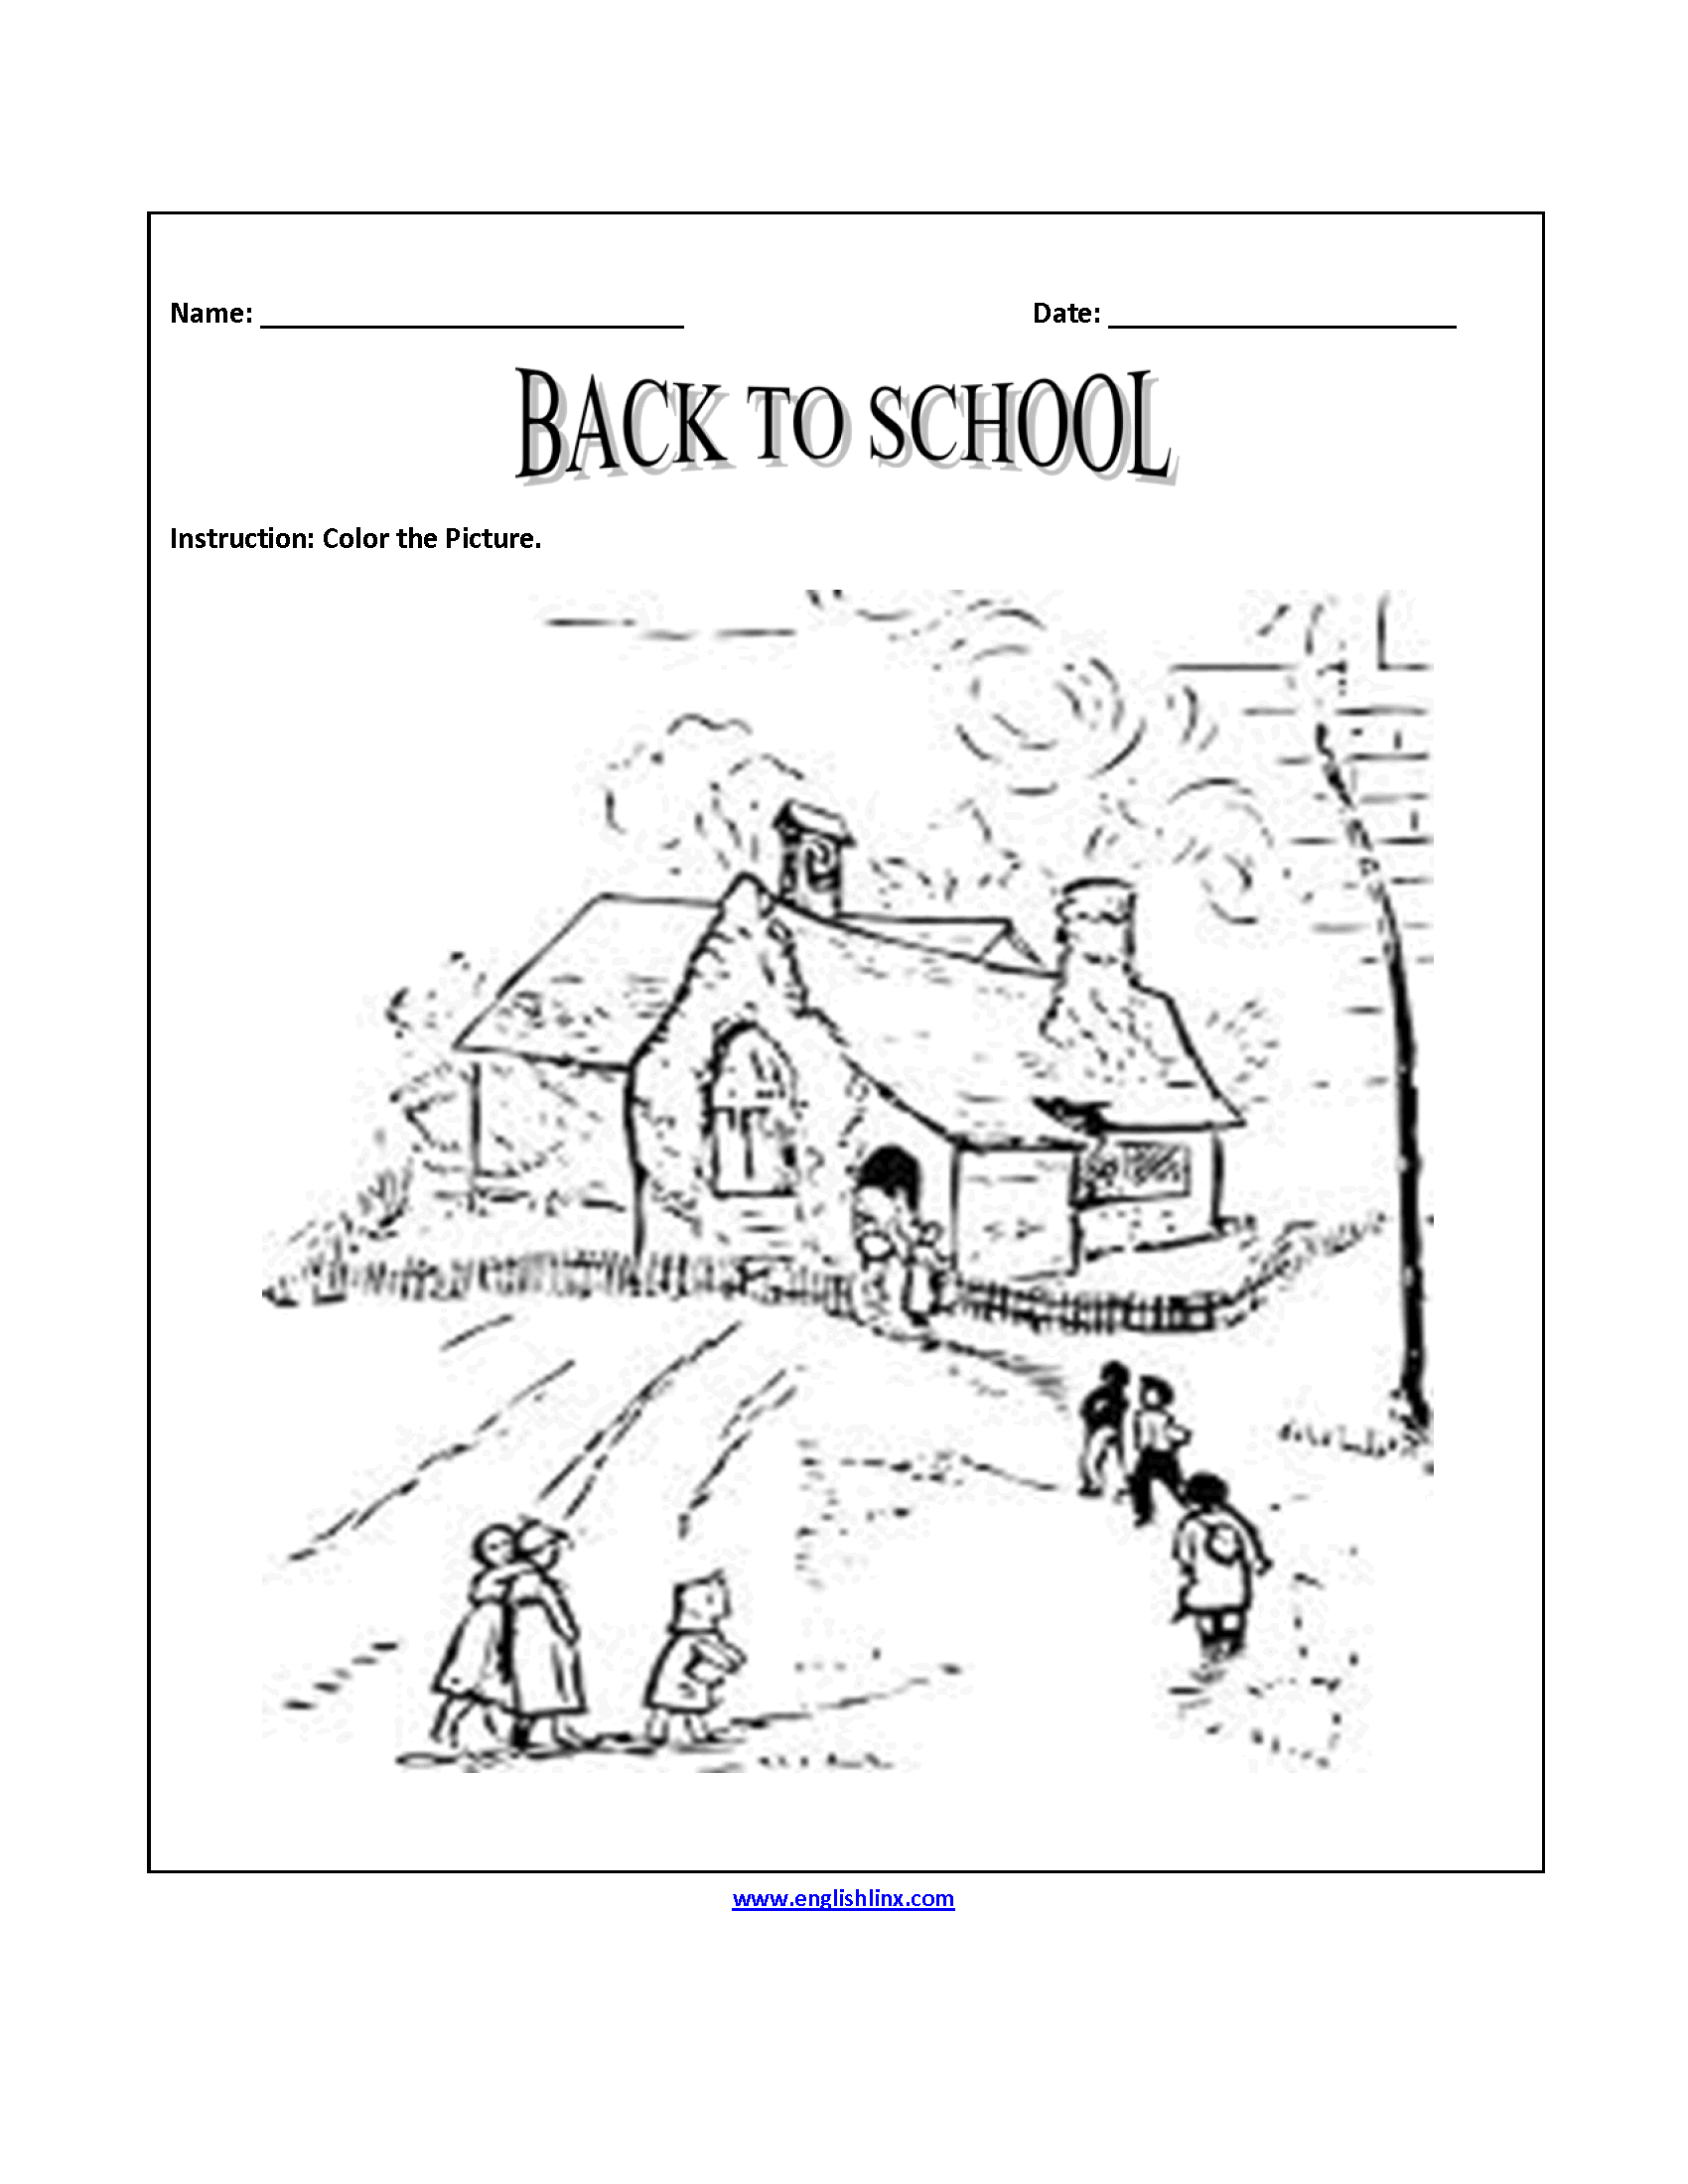 Back to School Worksheets | Back to School Coloring Page ...